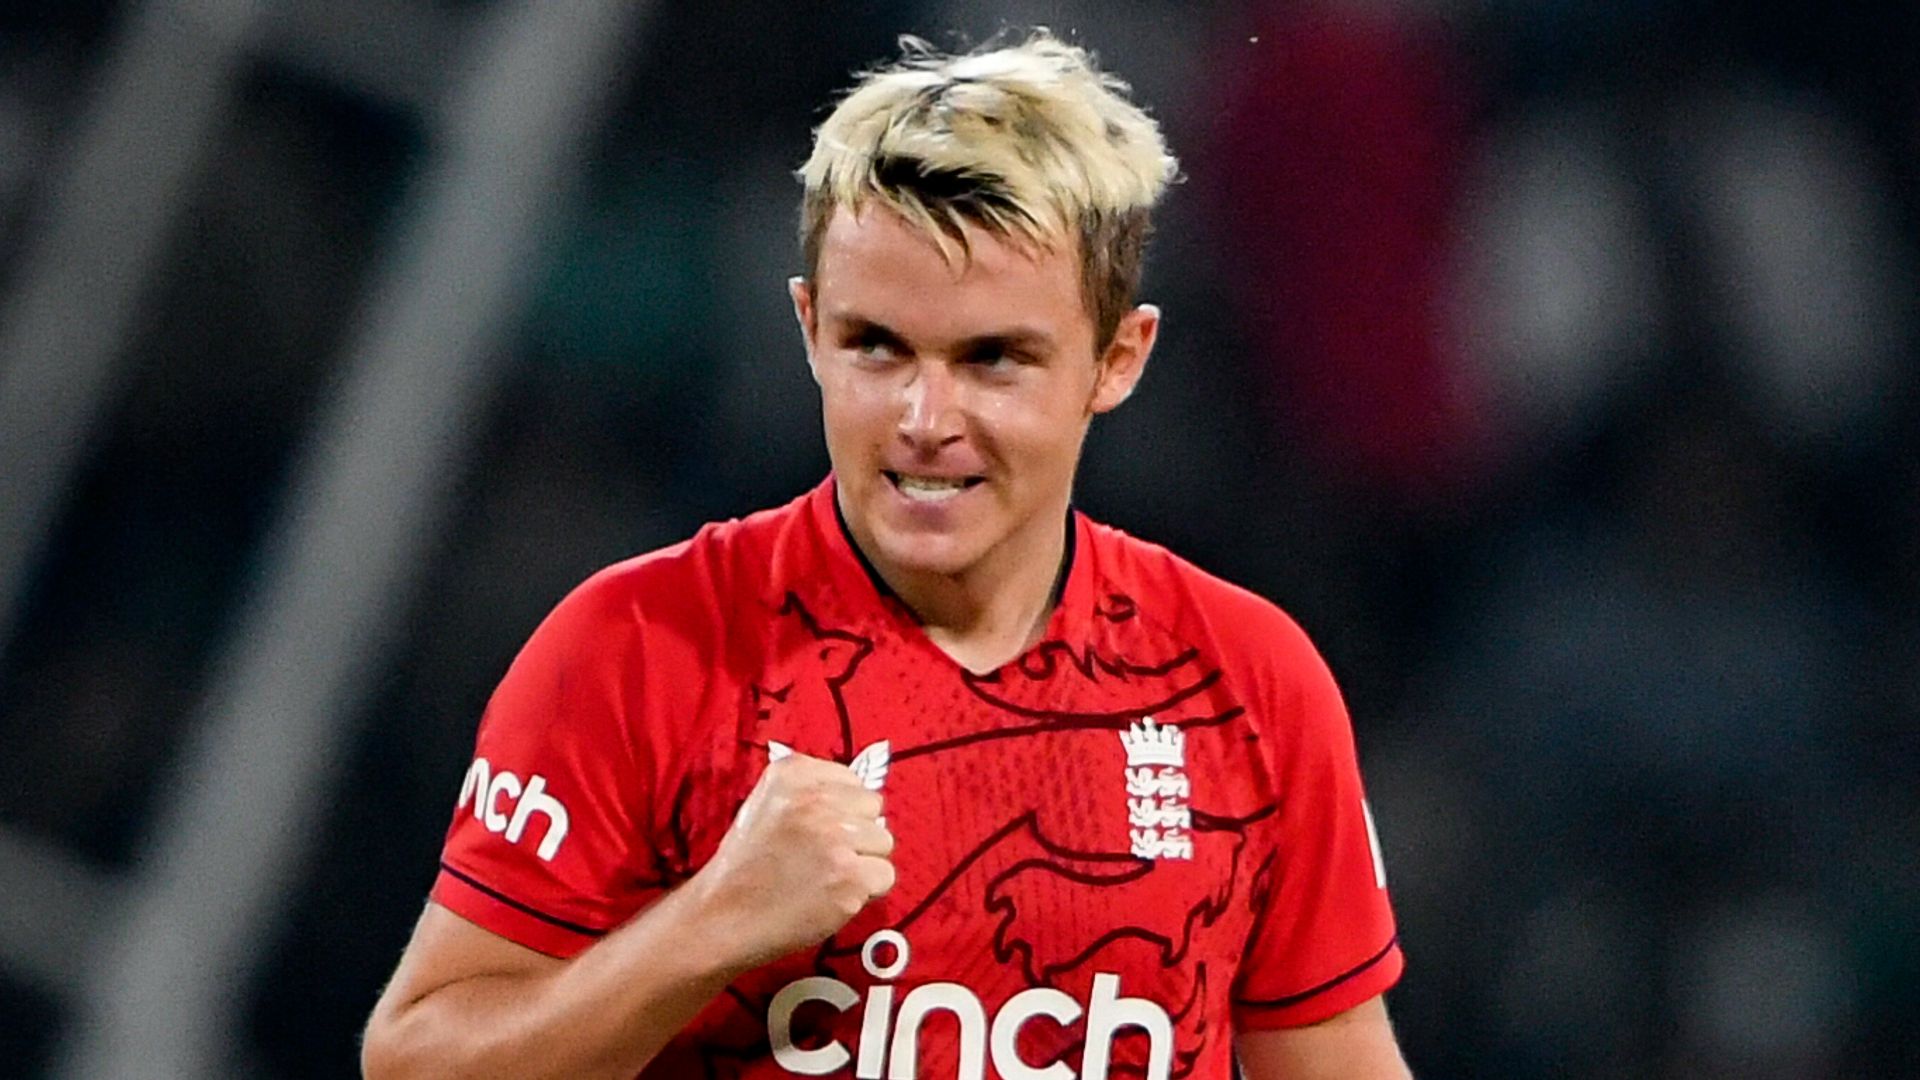 England chasing just 113 to beat Afghanistan after Curran five-for LIVE!